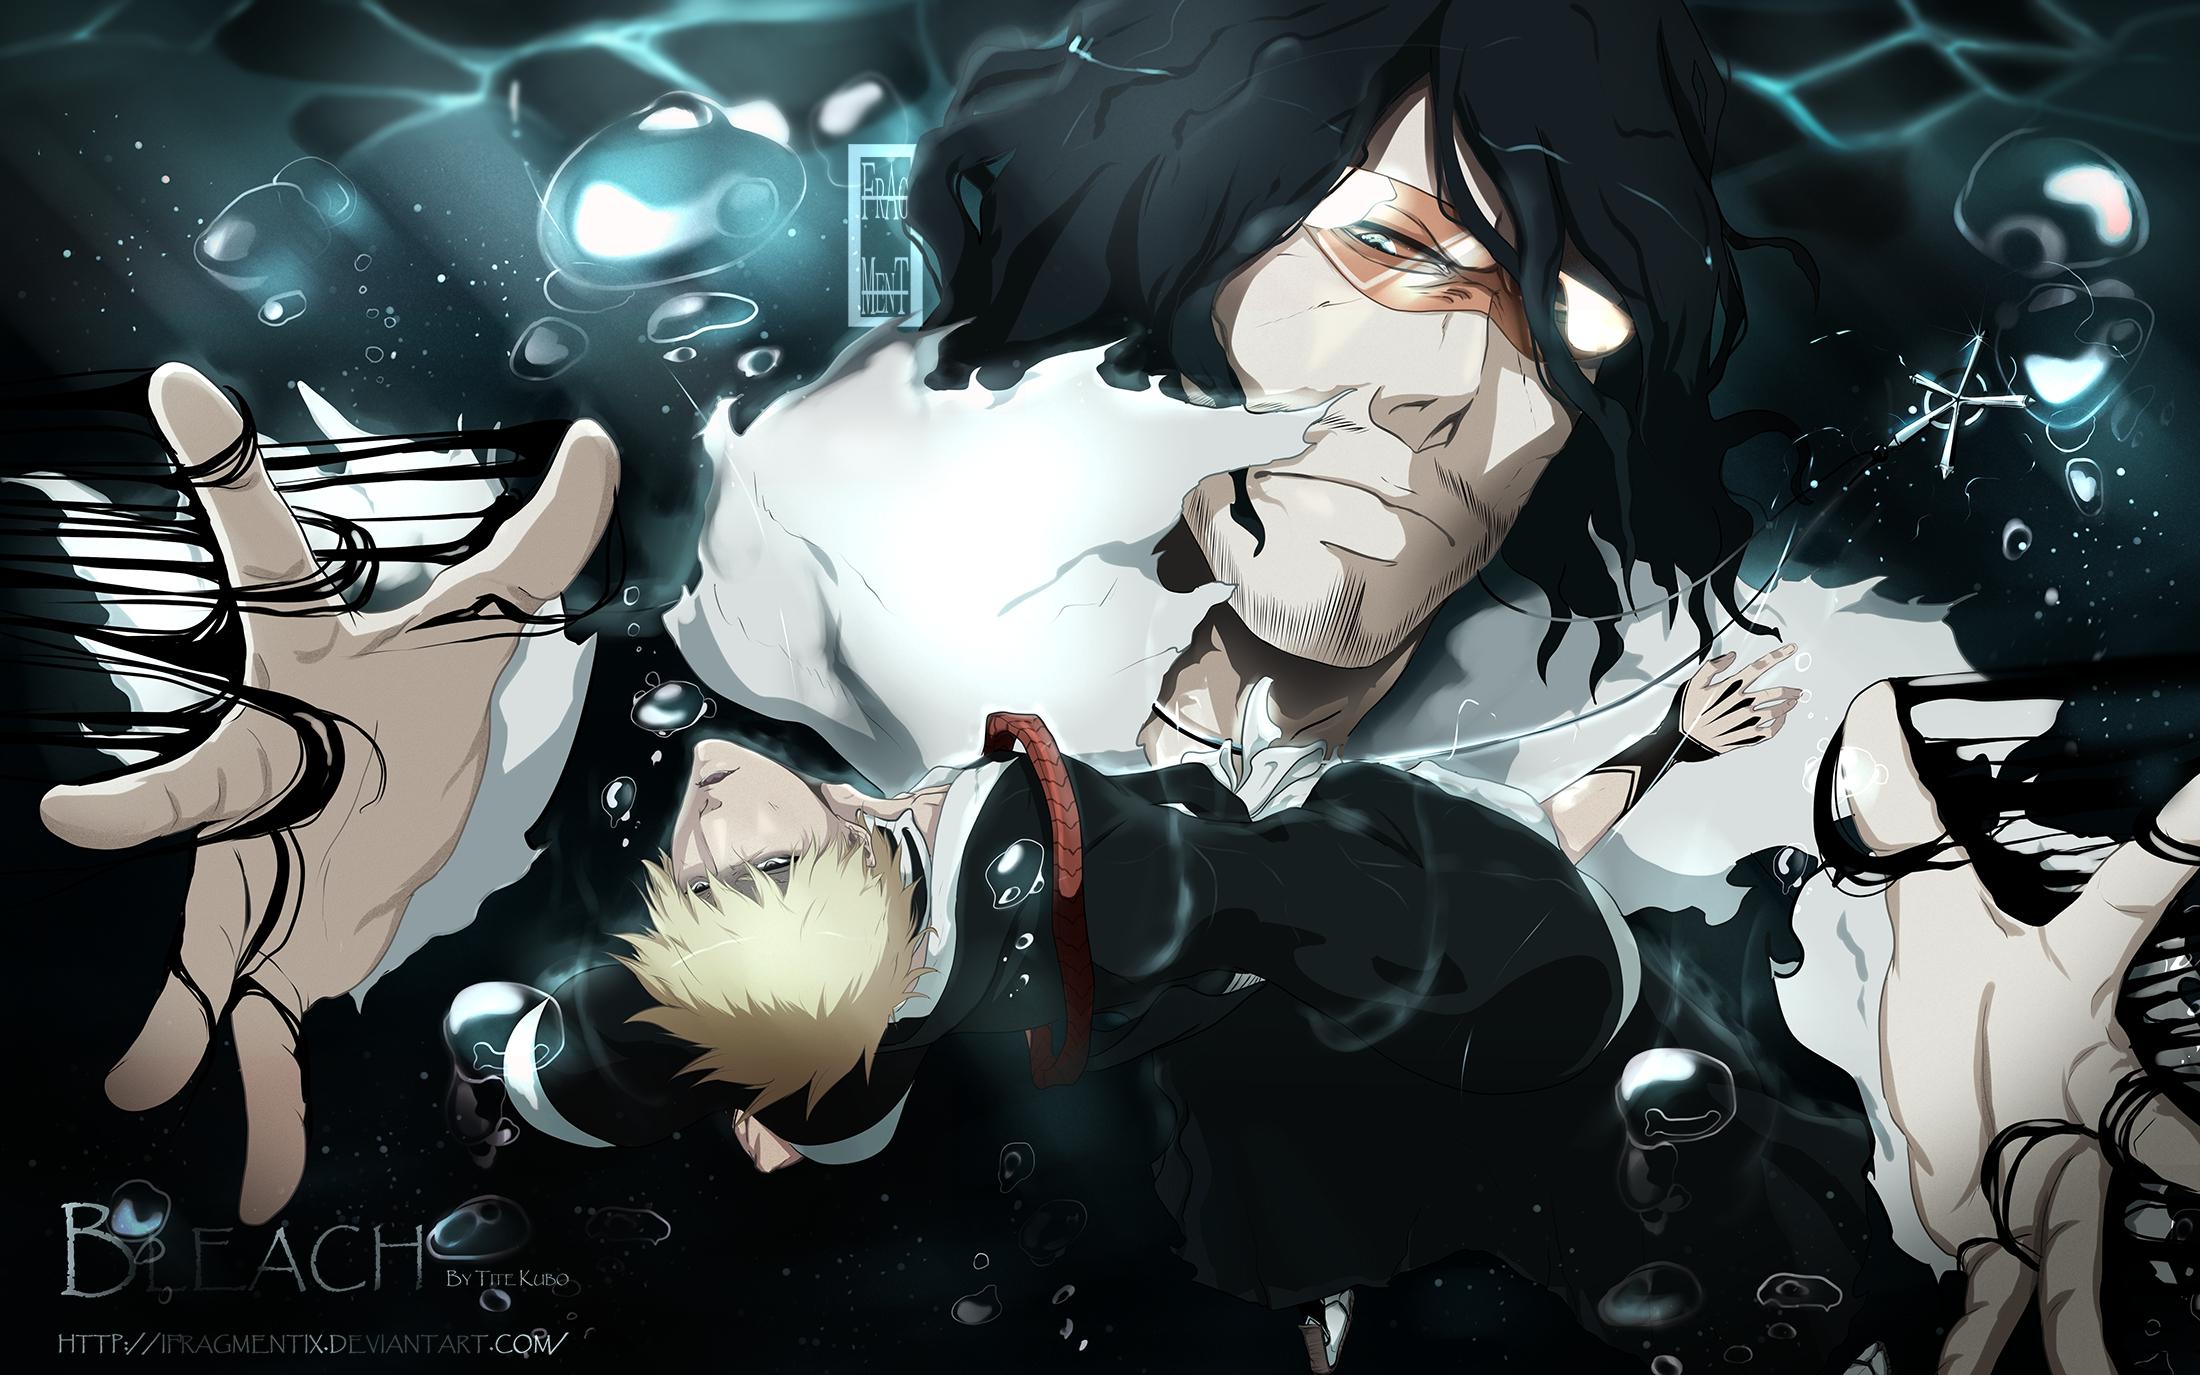 Download Free HQ Shinigami Wallpapers - hqwallbase.pw